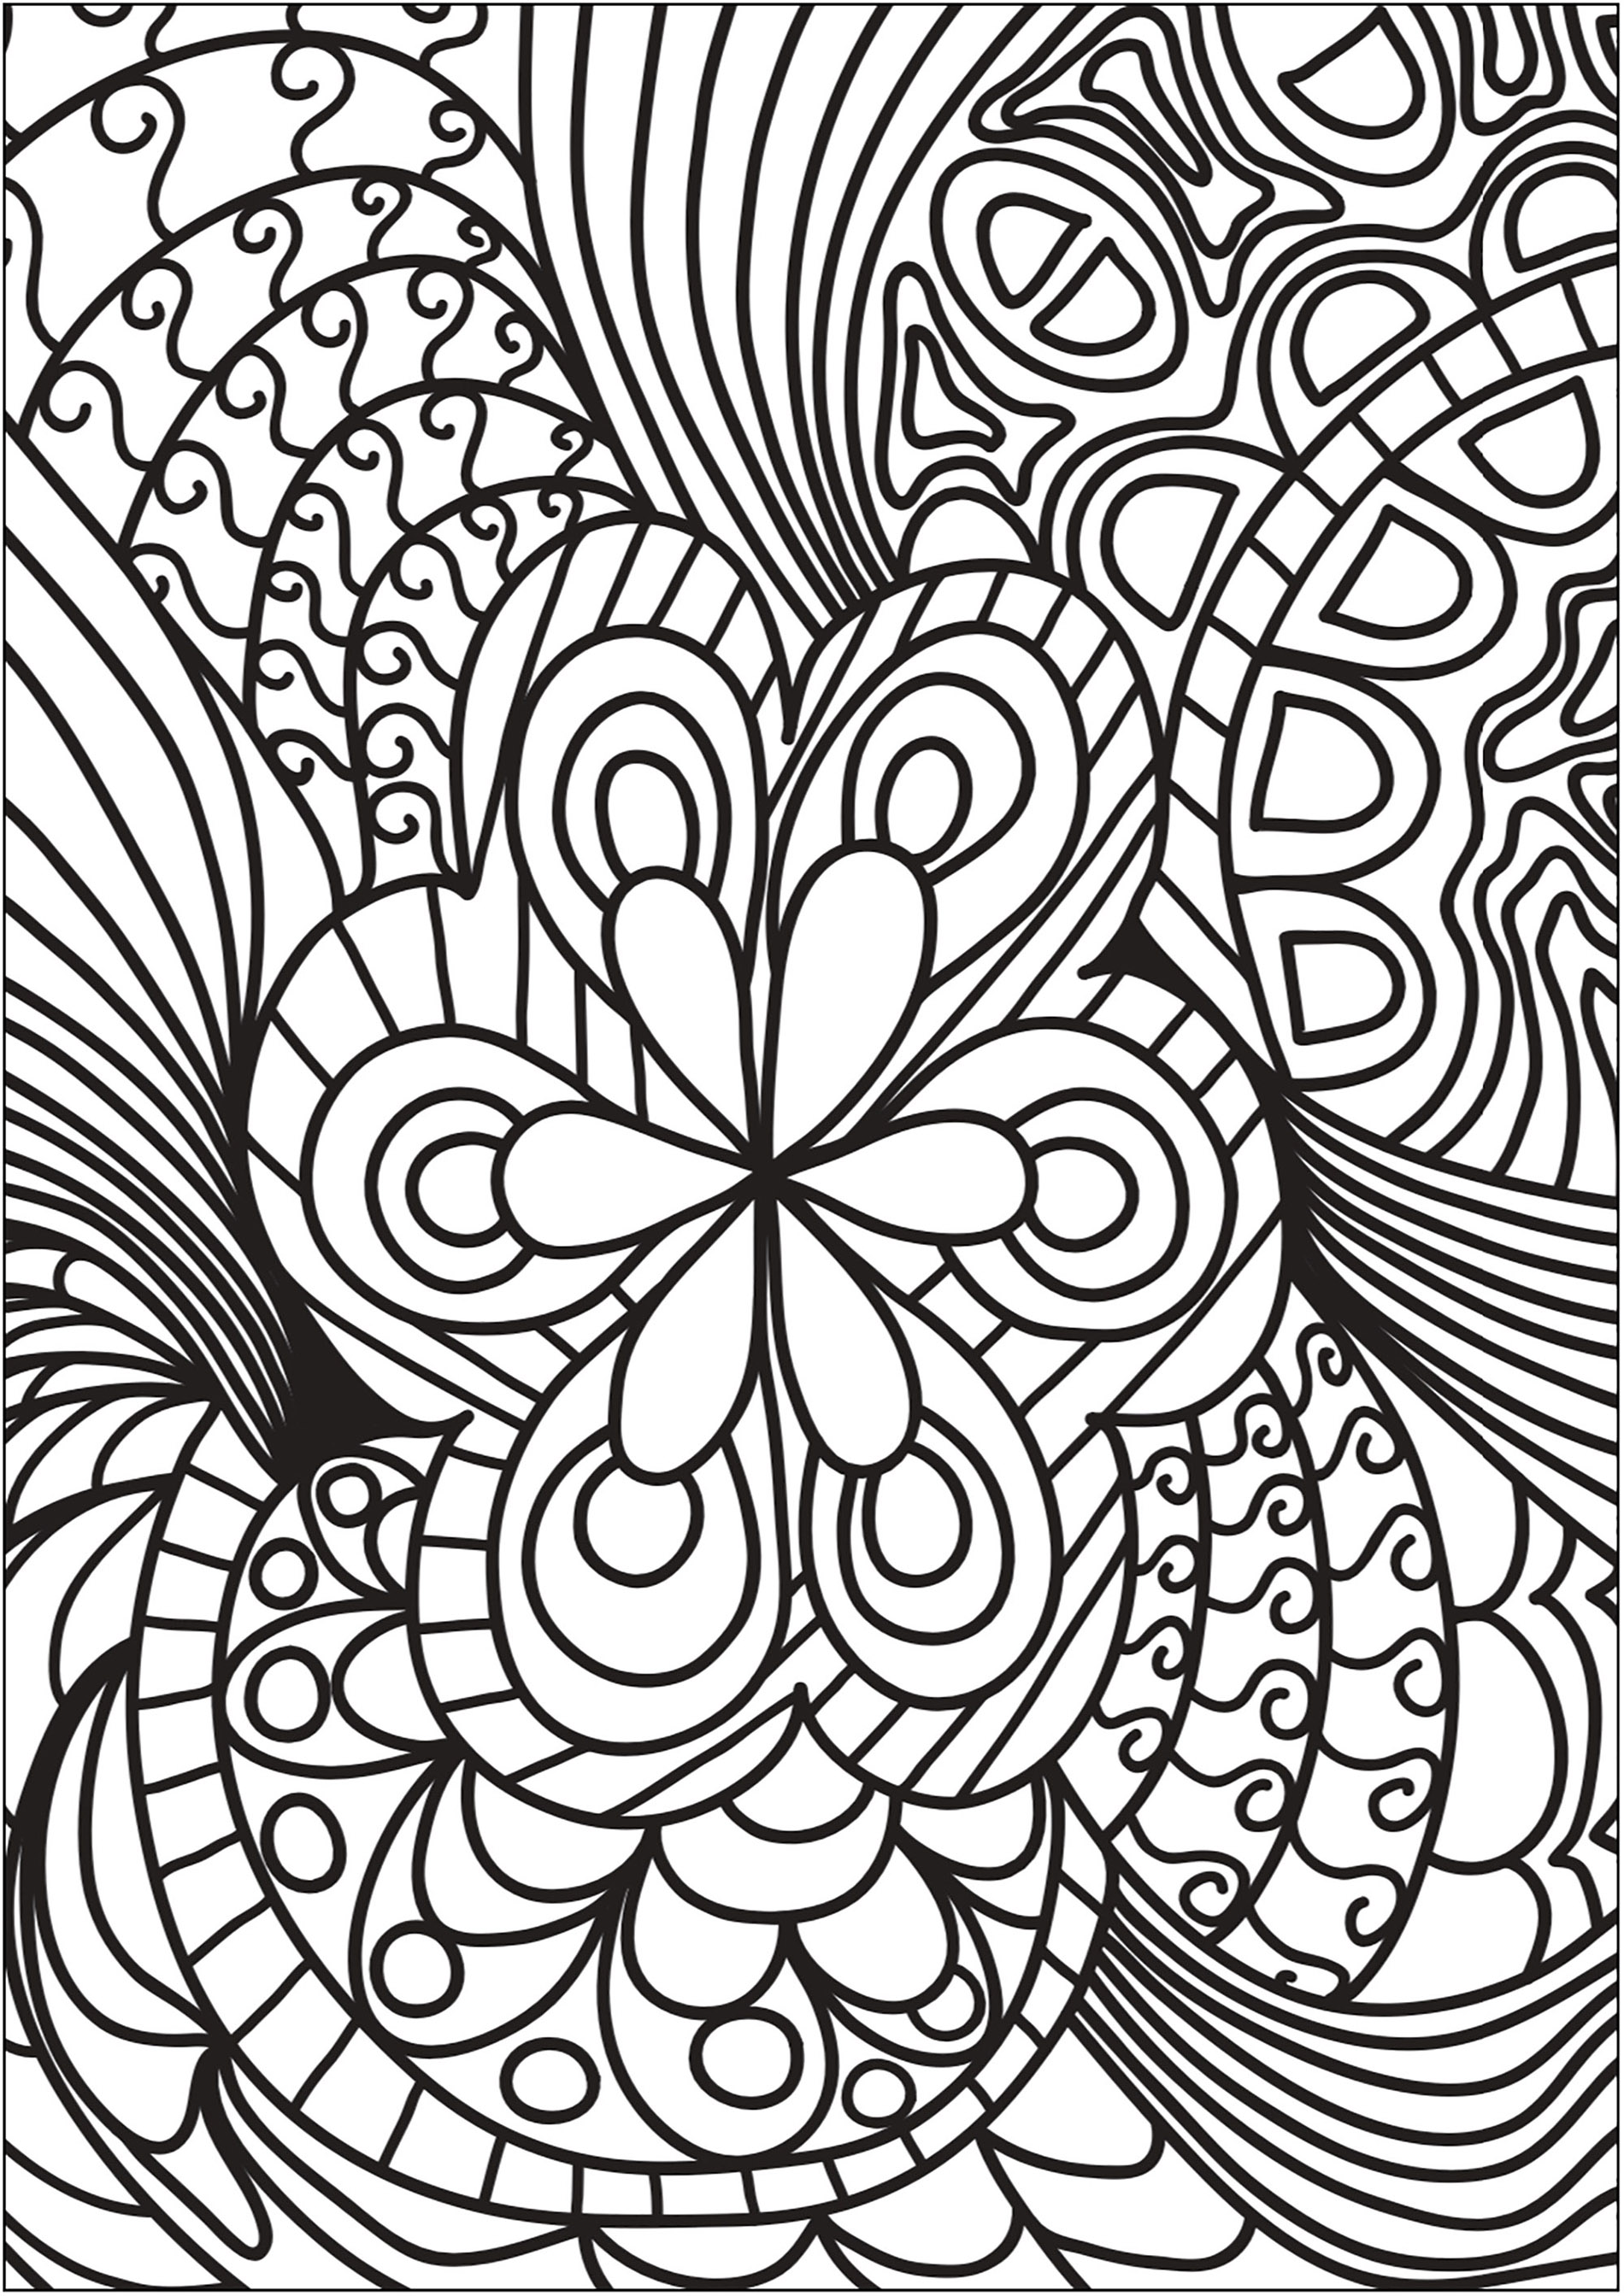 Nice Doodle with a central flower